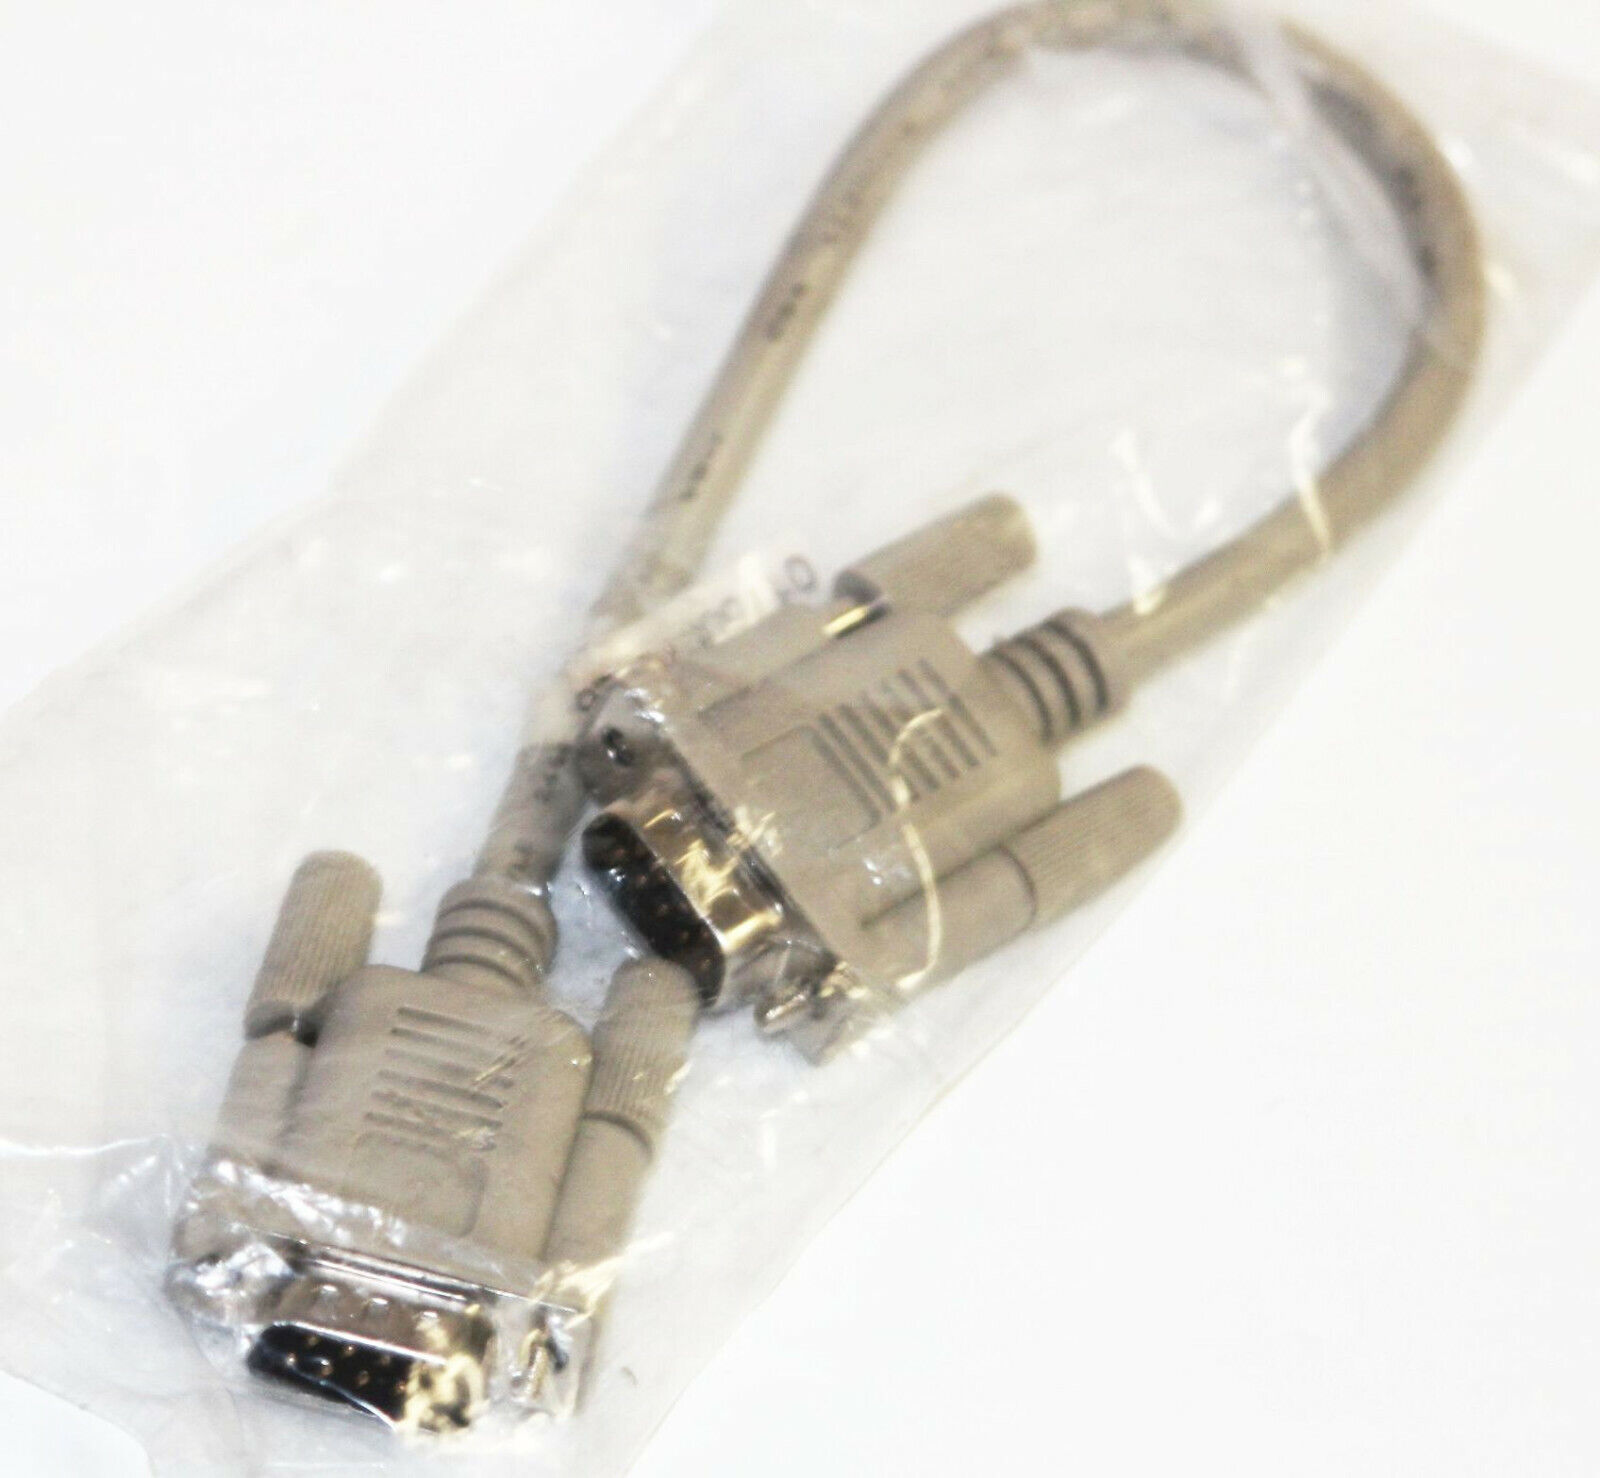 New OEM - Vintage Gray White 9 Pin Serial Cable #01750070728 - Male to Male M-M